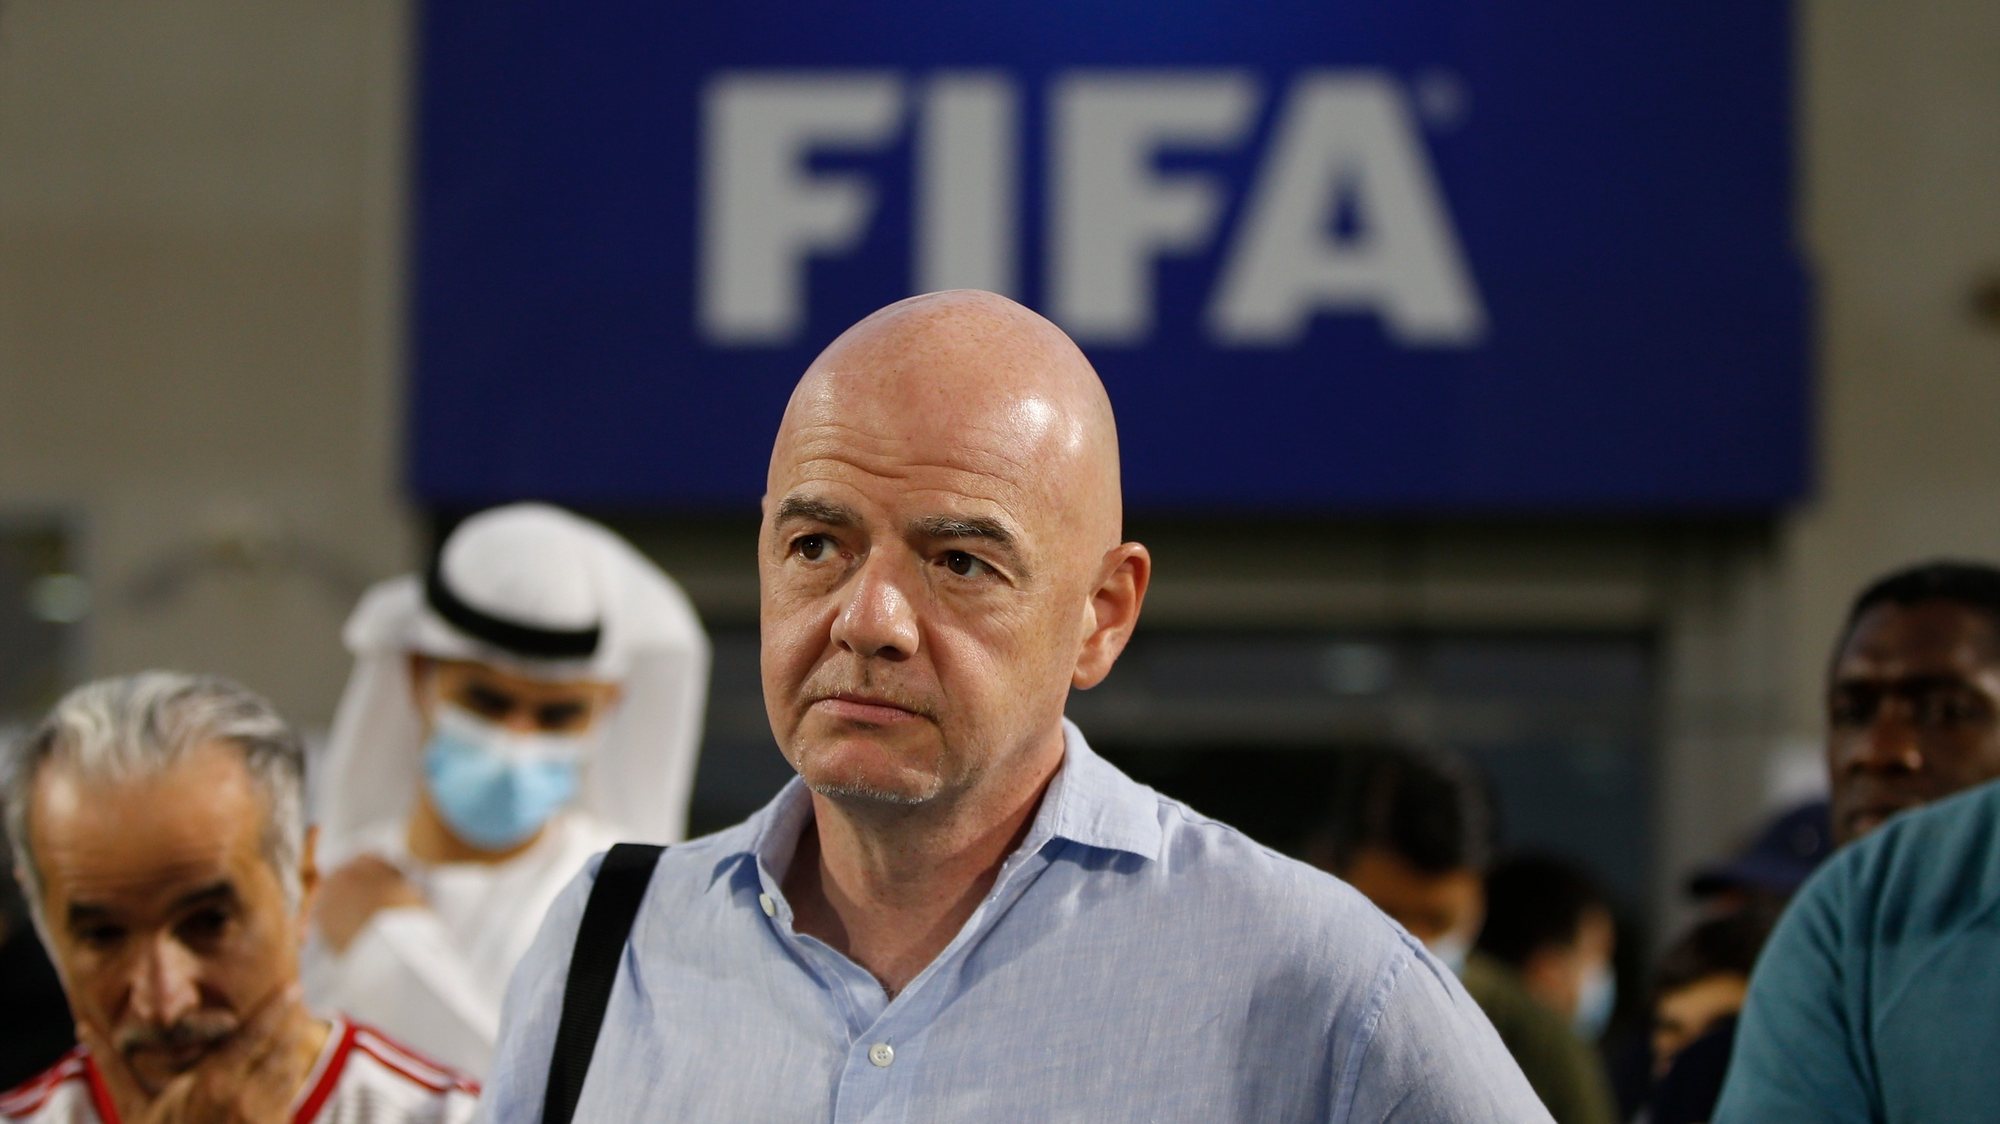 epa08926857 FIFA President Gianni Infantino (2-L) attends an exhibition soccer match played by International legend players including Emiratis players and UAE officials in Gulf emirate of Dubai, United Arab Emirates, 08 January 2021.  EPA/ALI HAIDER